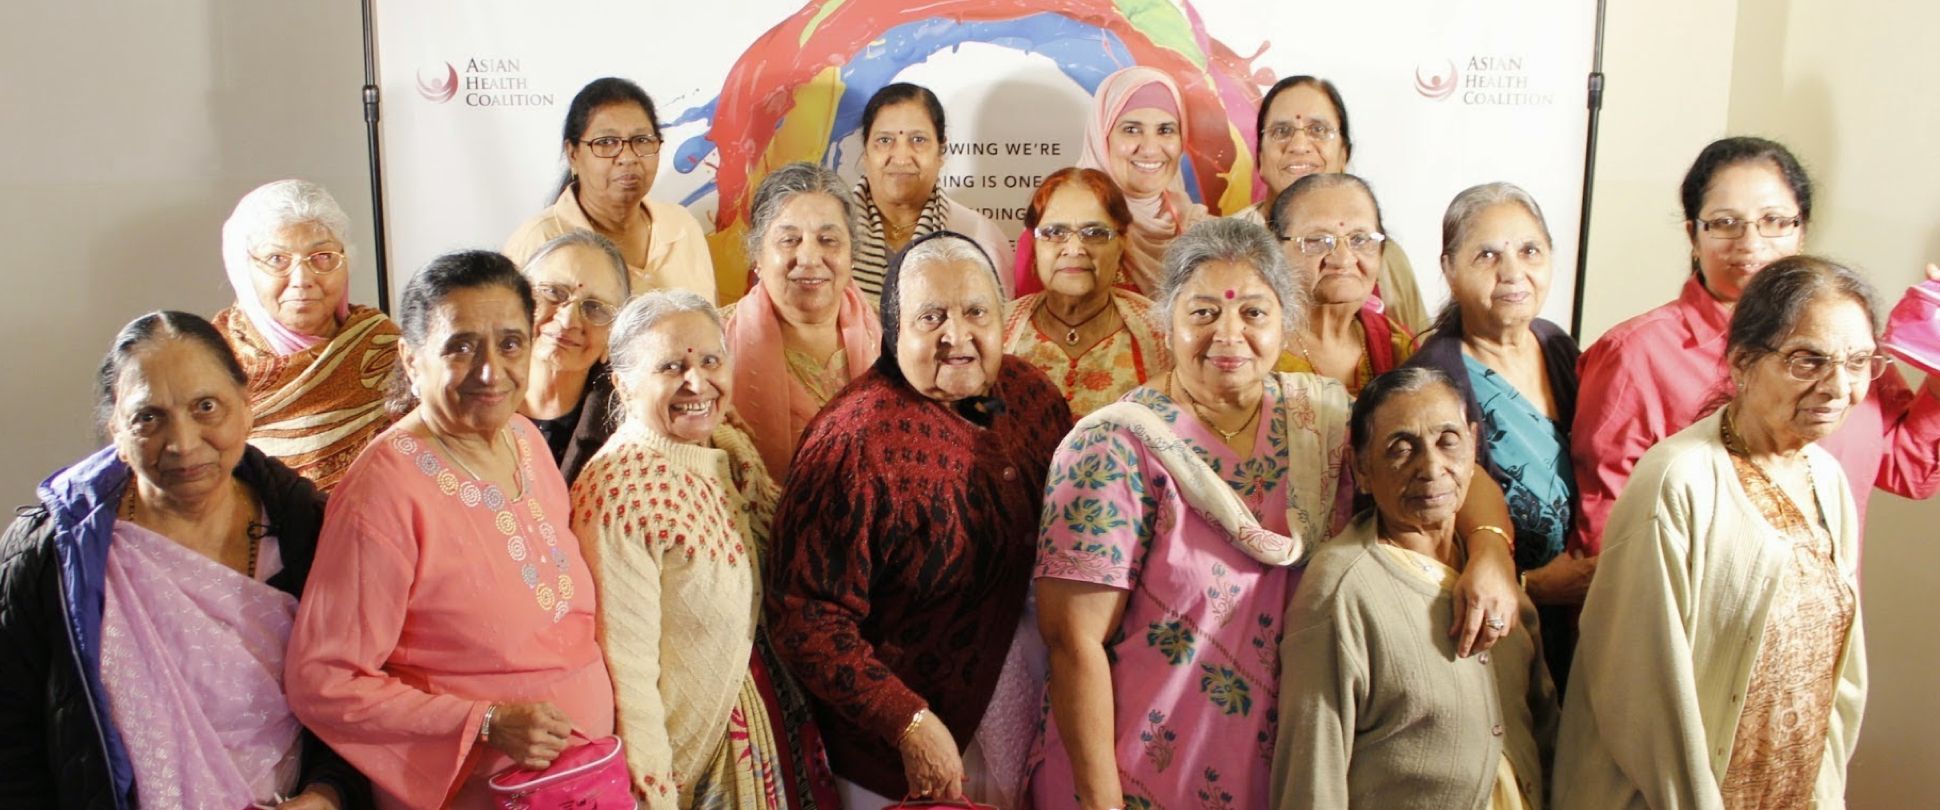 Image of a group of South Asian older adult women posing